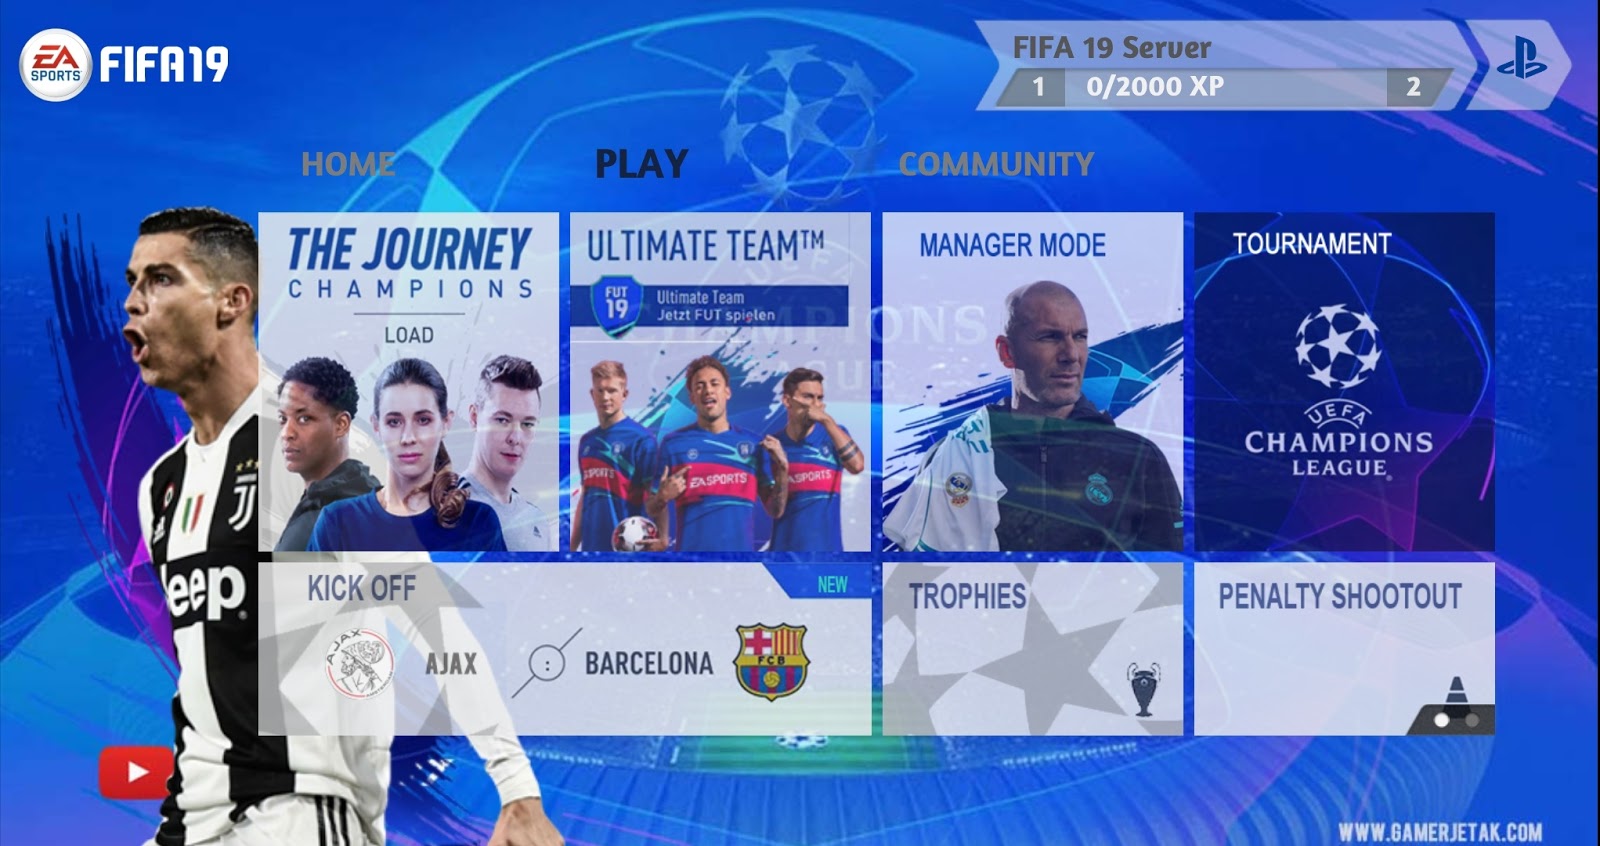 FIFA 19 UEFA Champions League ⭐ Highly Compressed 1.5GB ⭐